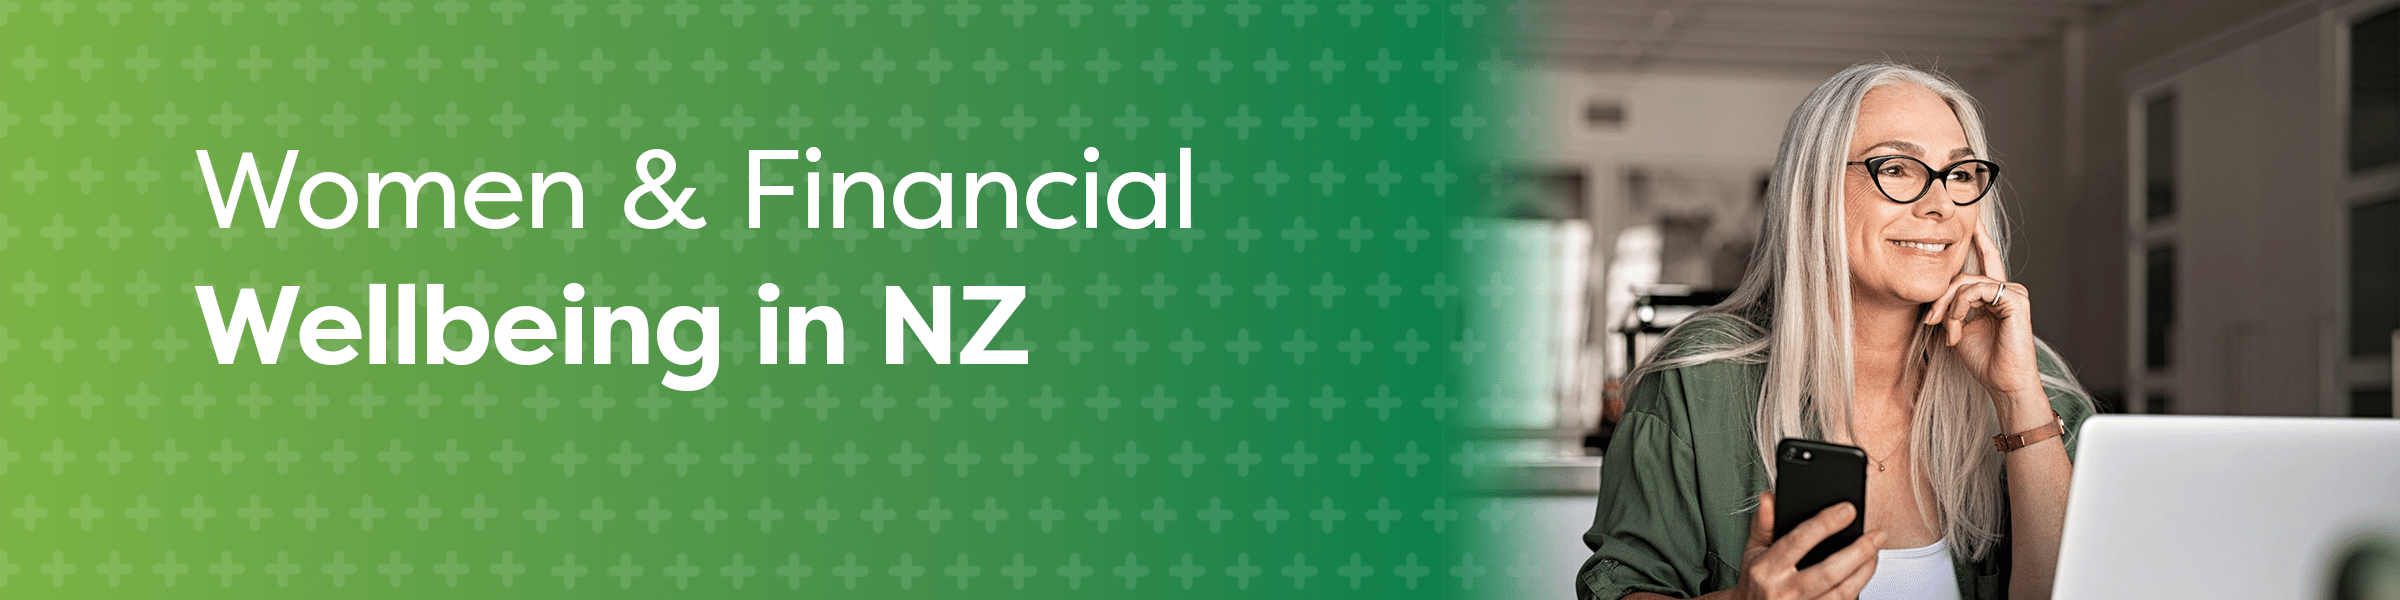 women and financial wellbeing in nz